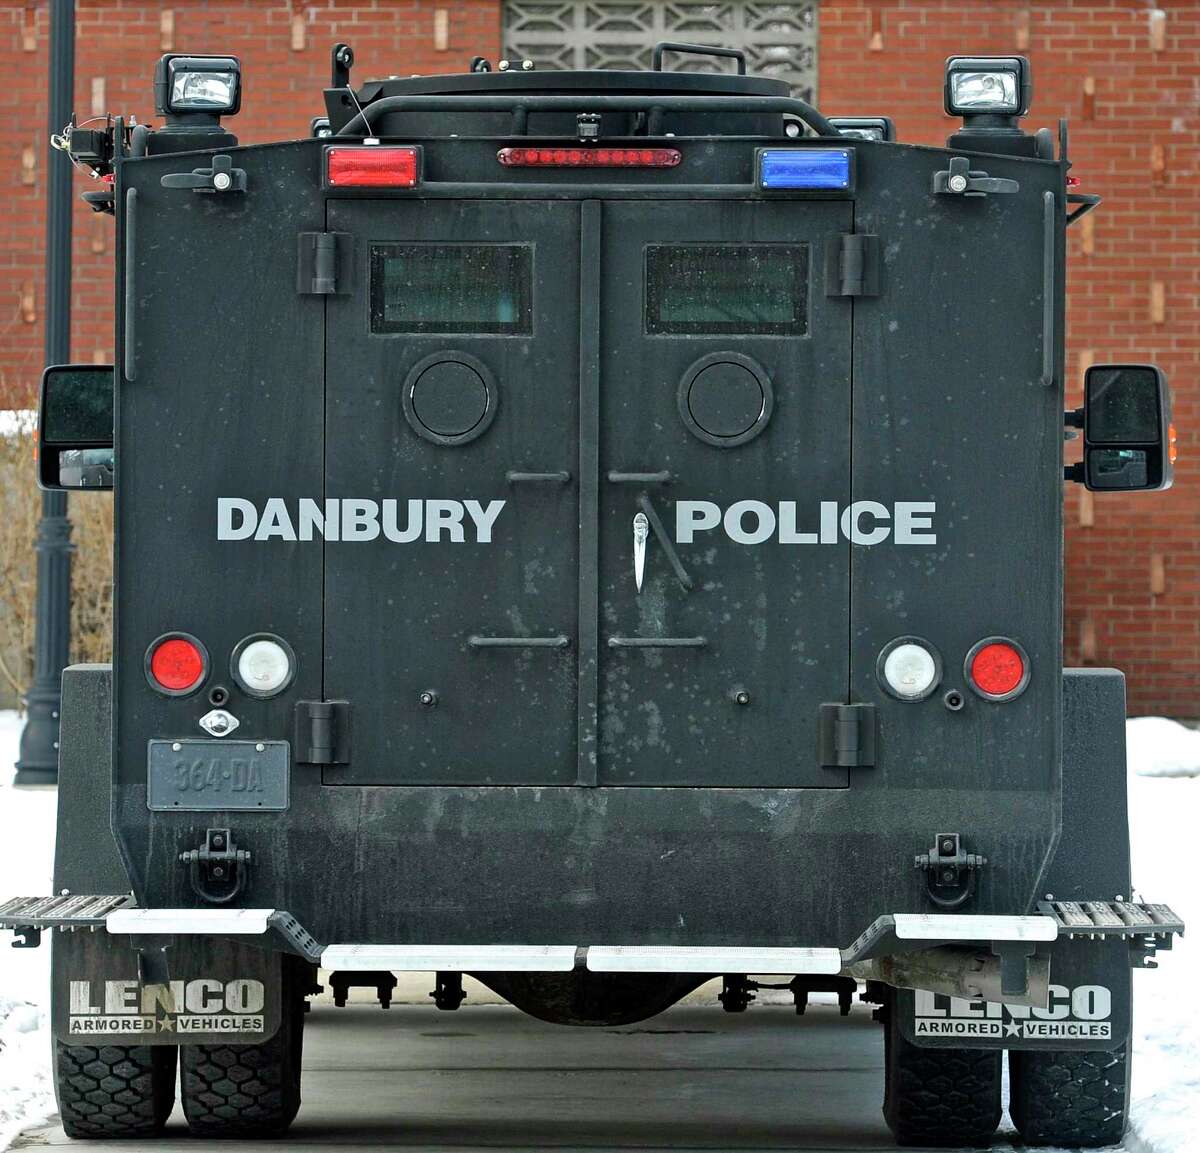 A Danbury Police Department Emergency Services Unit is parked next to Litchfield Hall during a Western Connecticut State University Police Department live shooting exercise with Danbury and other area police departments at the WCSU midtown campus Campus on Thursday, February 11, 2016, in Danbury, Conn. The training drill took place in the university's Litchfield Hall dormitory building.